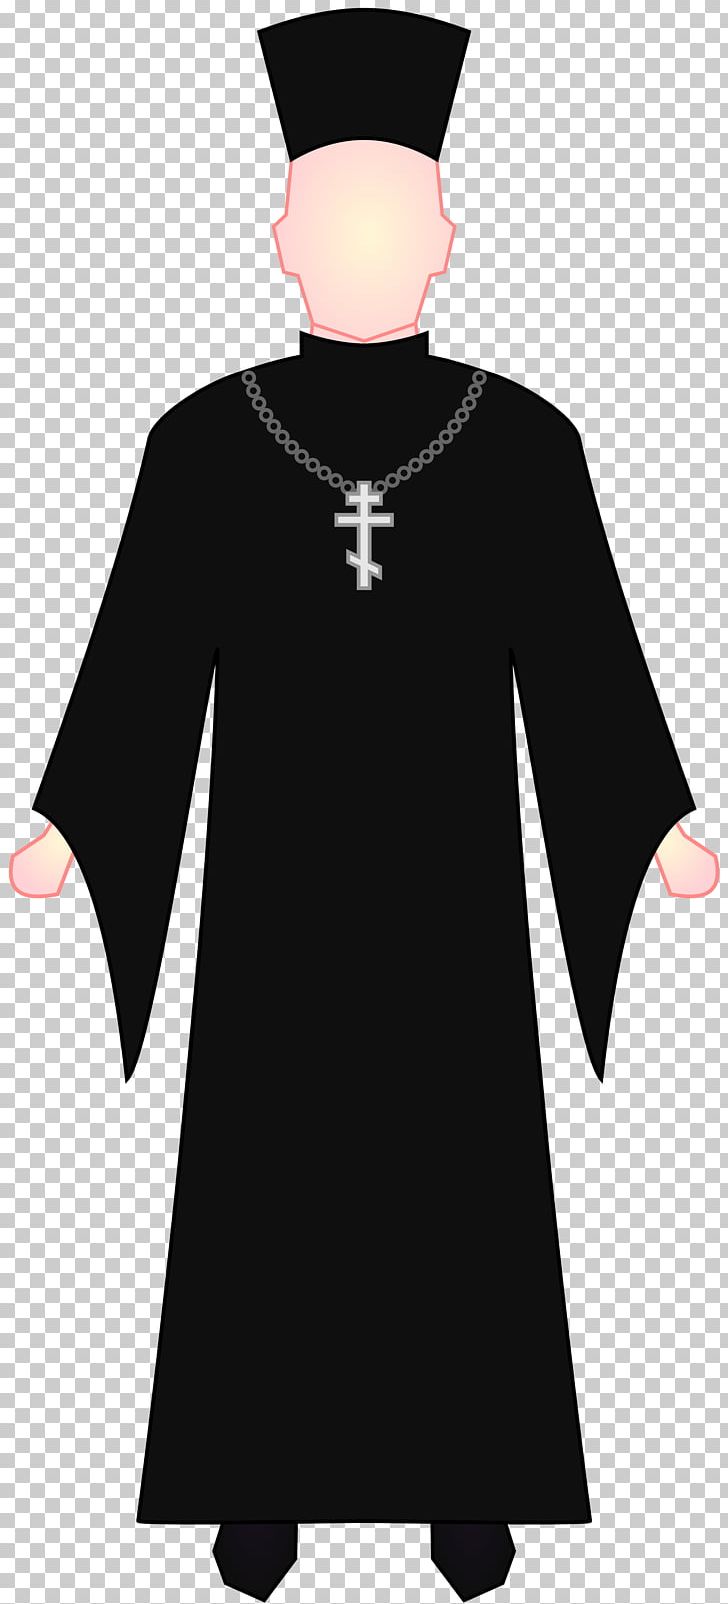 Russian Orthodox Church Robe Eastern Orthodox Church Vestment PNG, Clipart, Academic Dress, Black, Cassock, Choir Dress, Clergy Free PNG Download